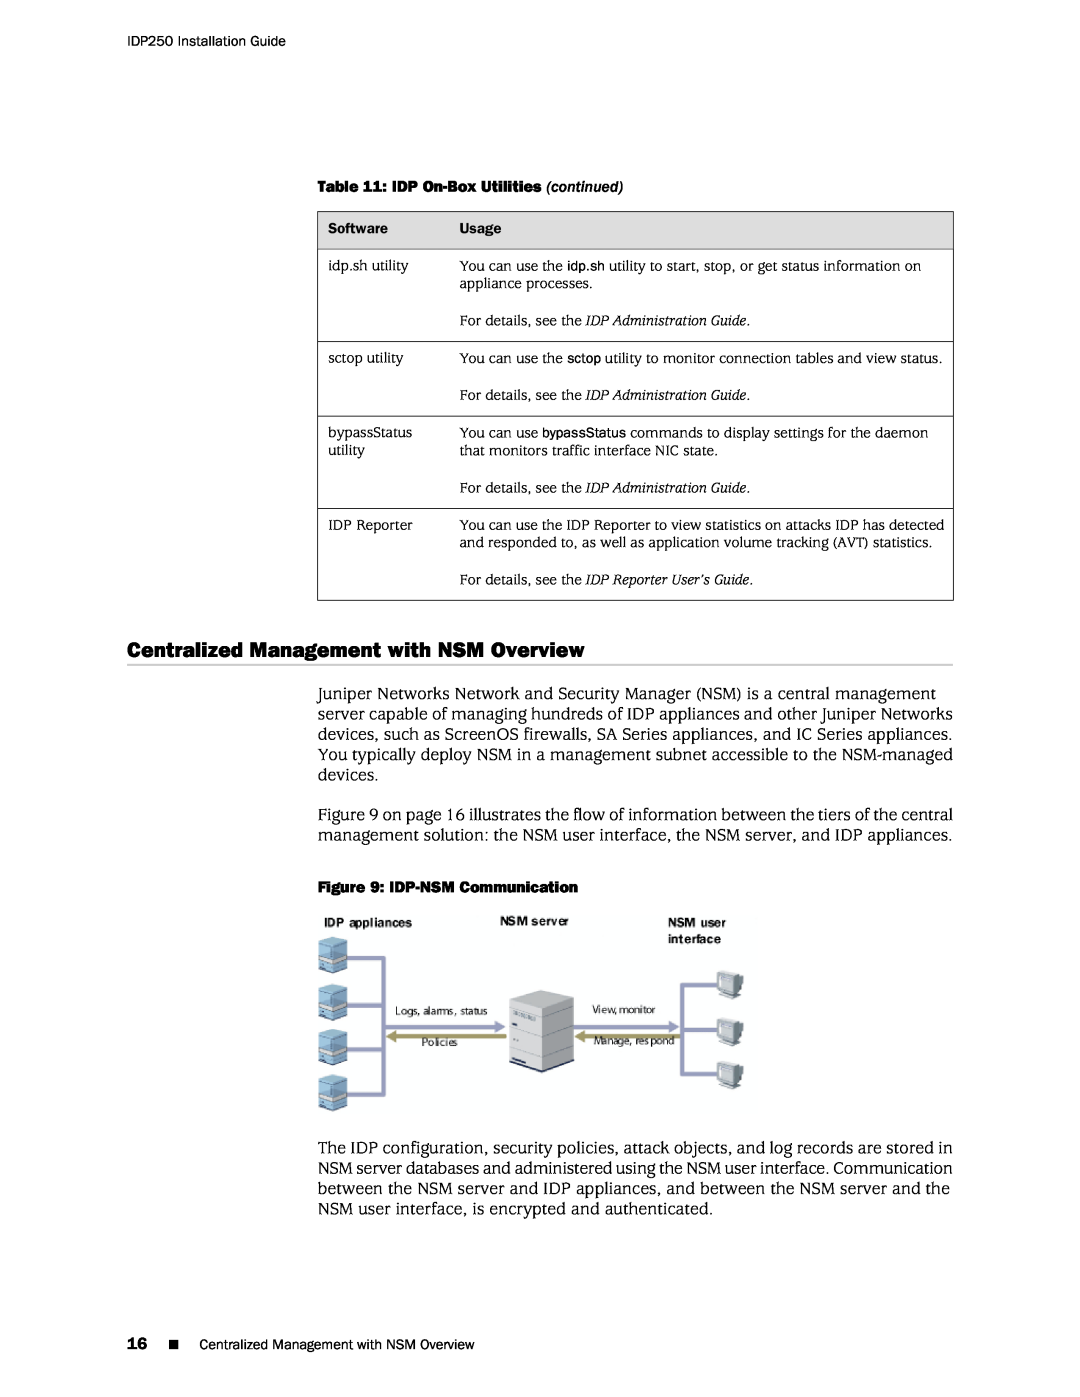 Juniper Networks IDP250 Centralized Management with NSM Overview, IDP On-BoxUtilities continued, IDP-NSMCommunication 